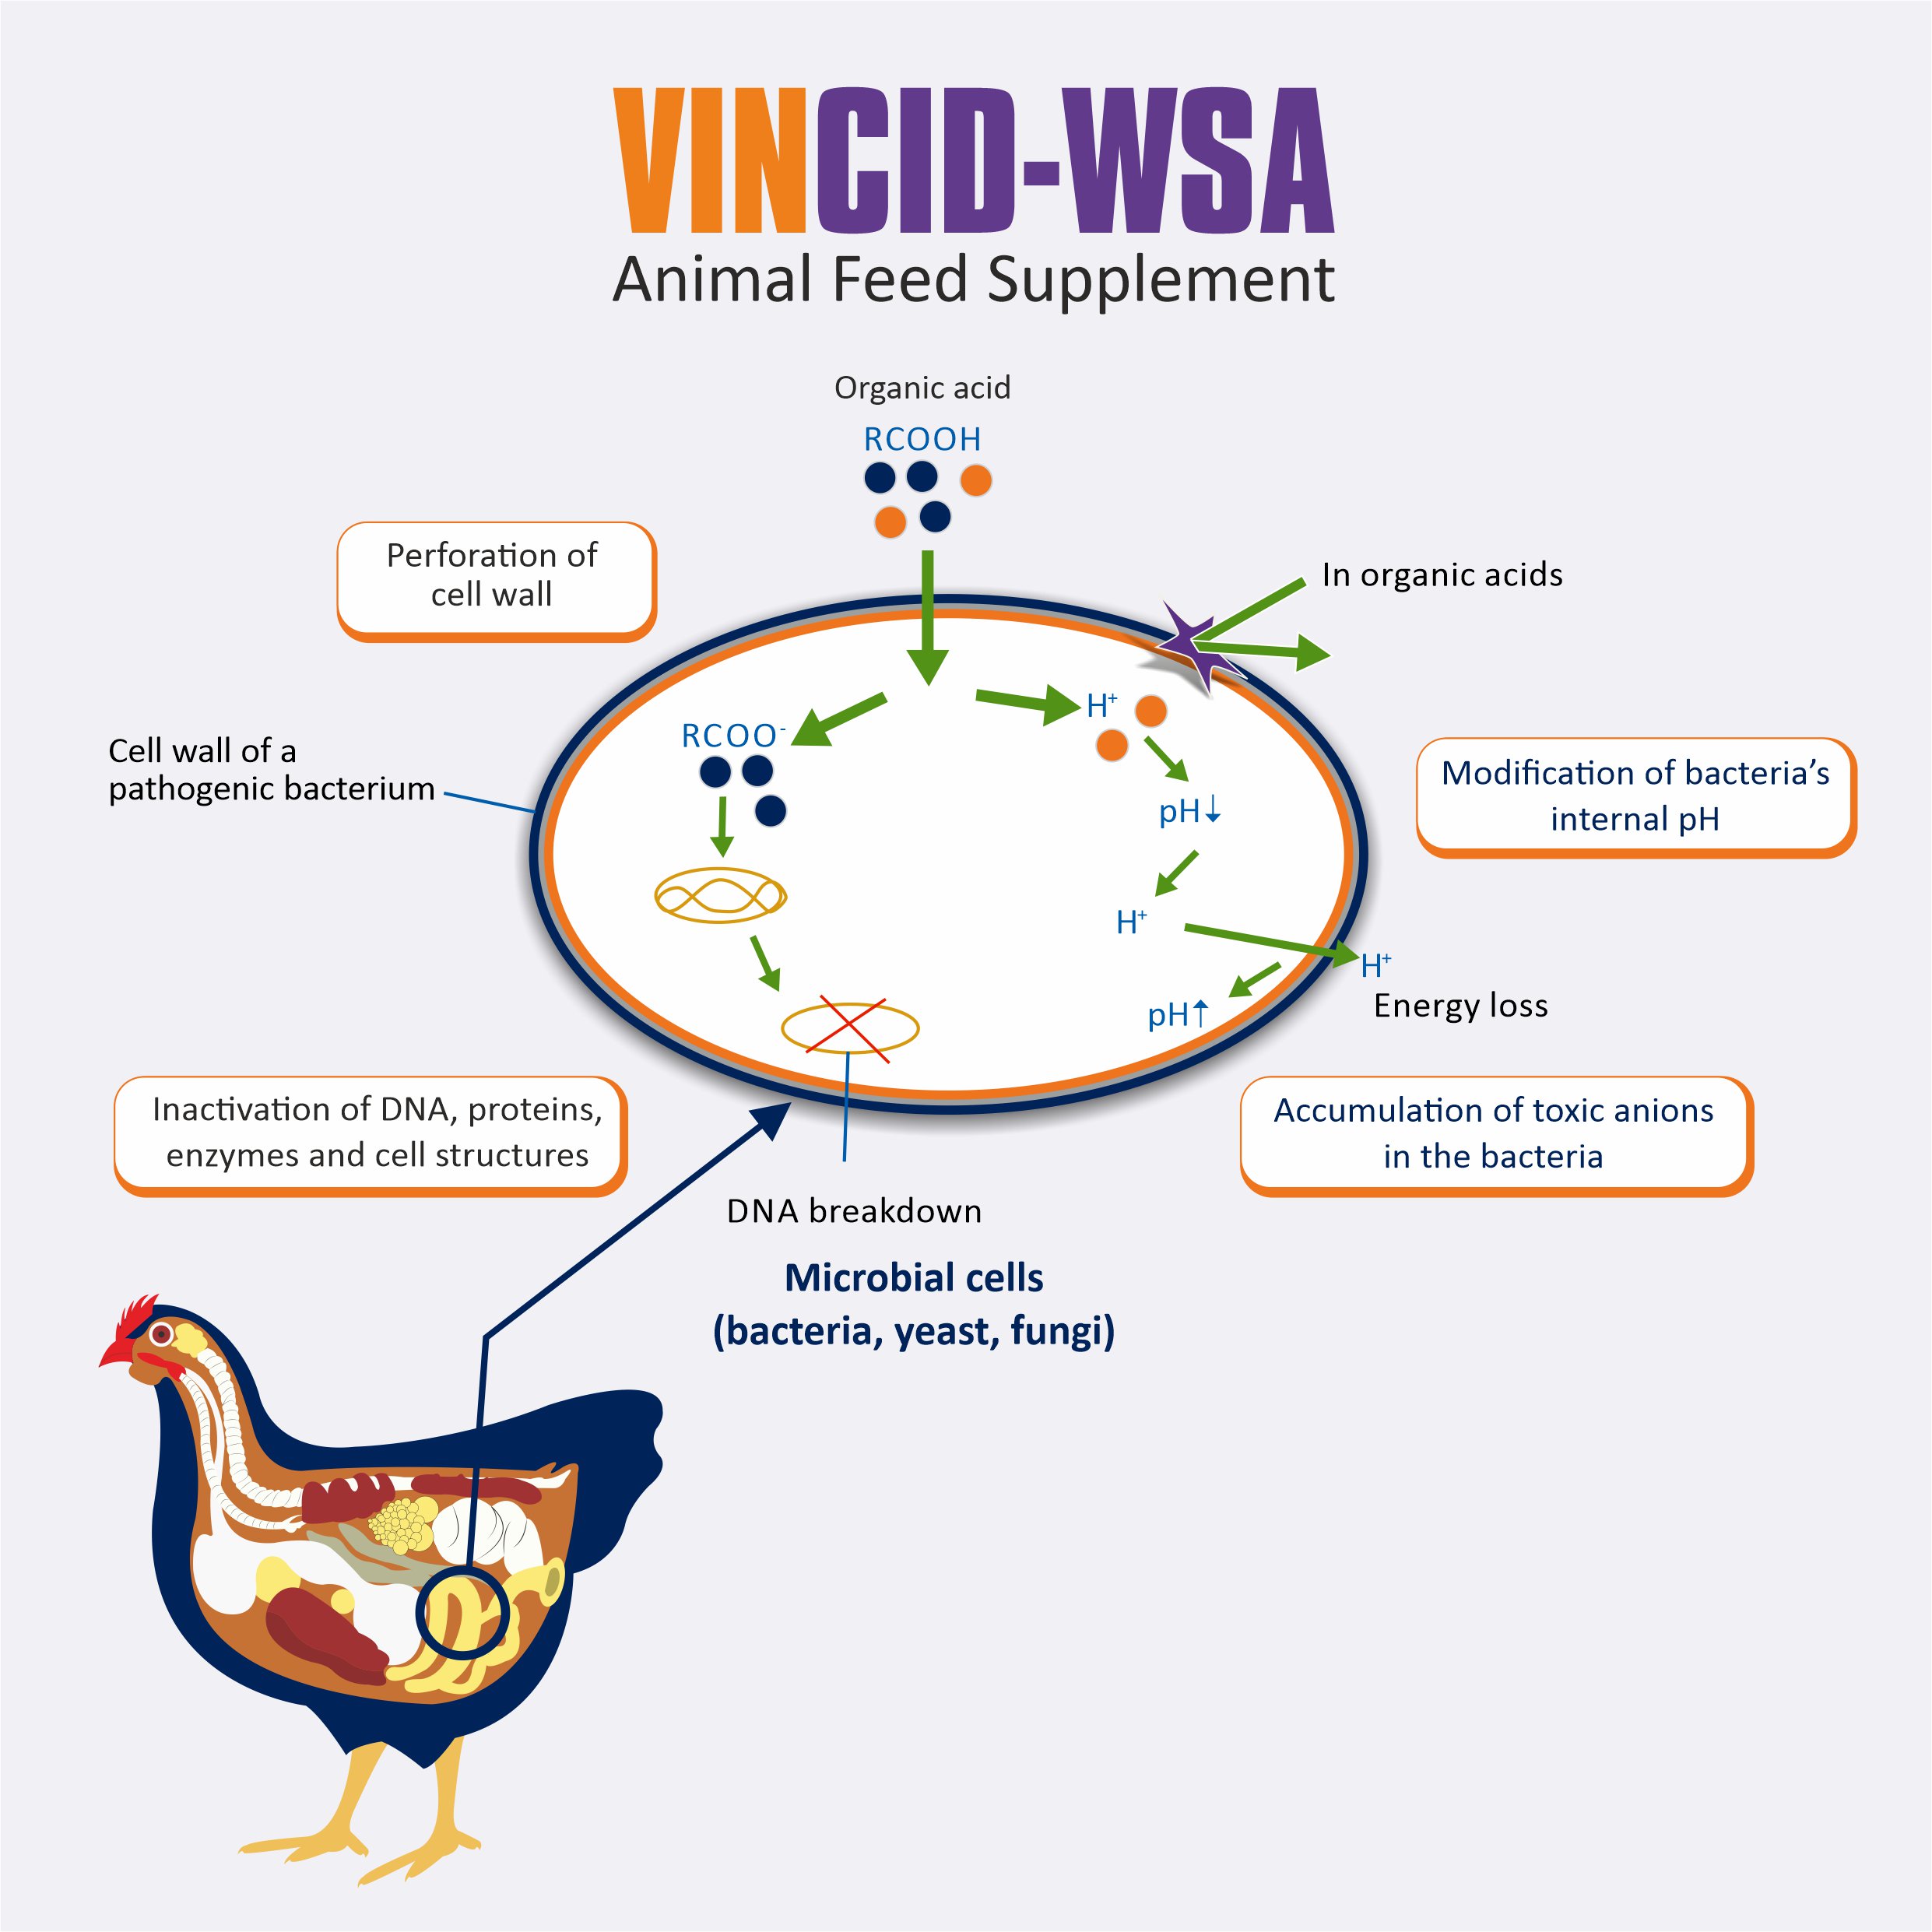 VINCID-WSA MOA - improving gut health in poultry -Improved digestion and absorption of nutrients in poultry